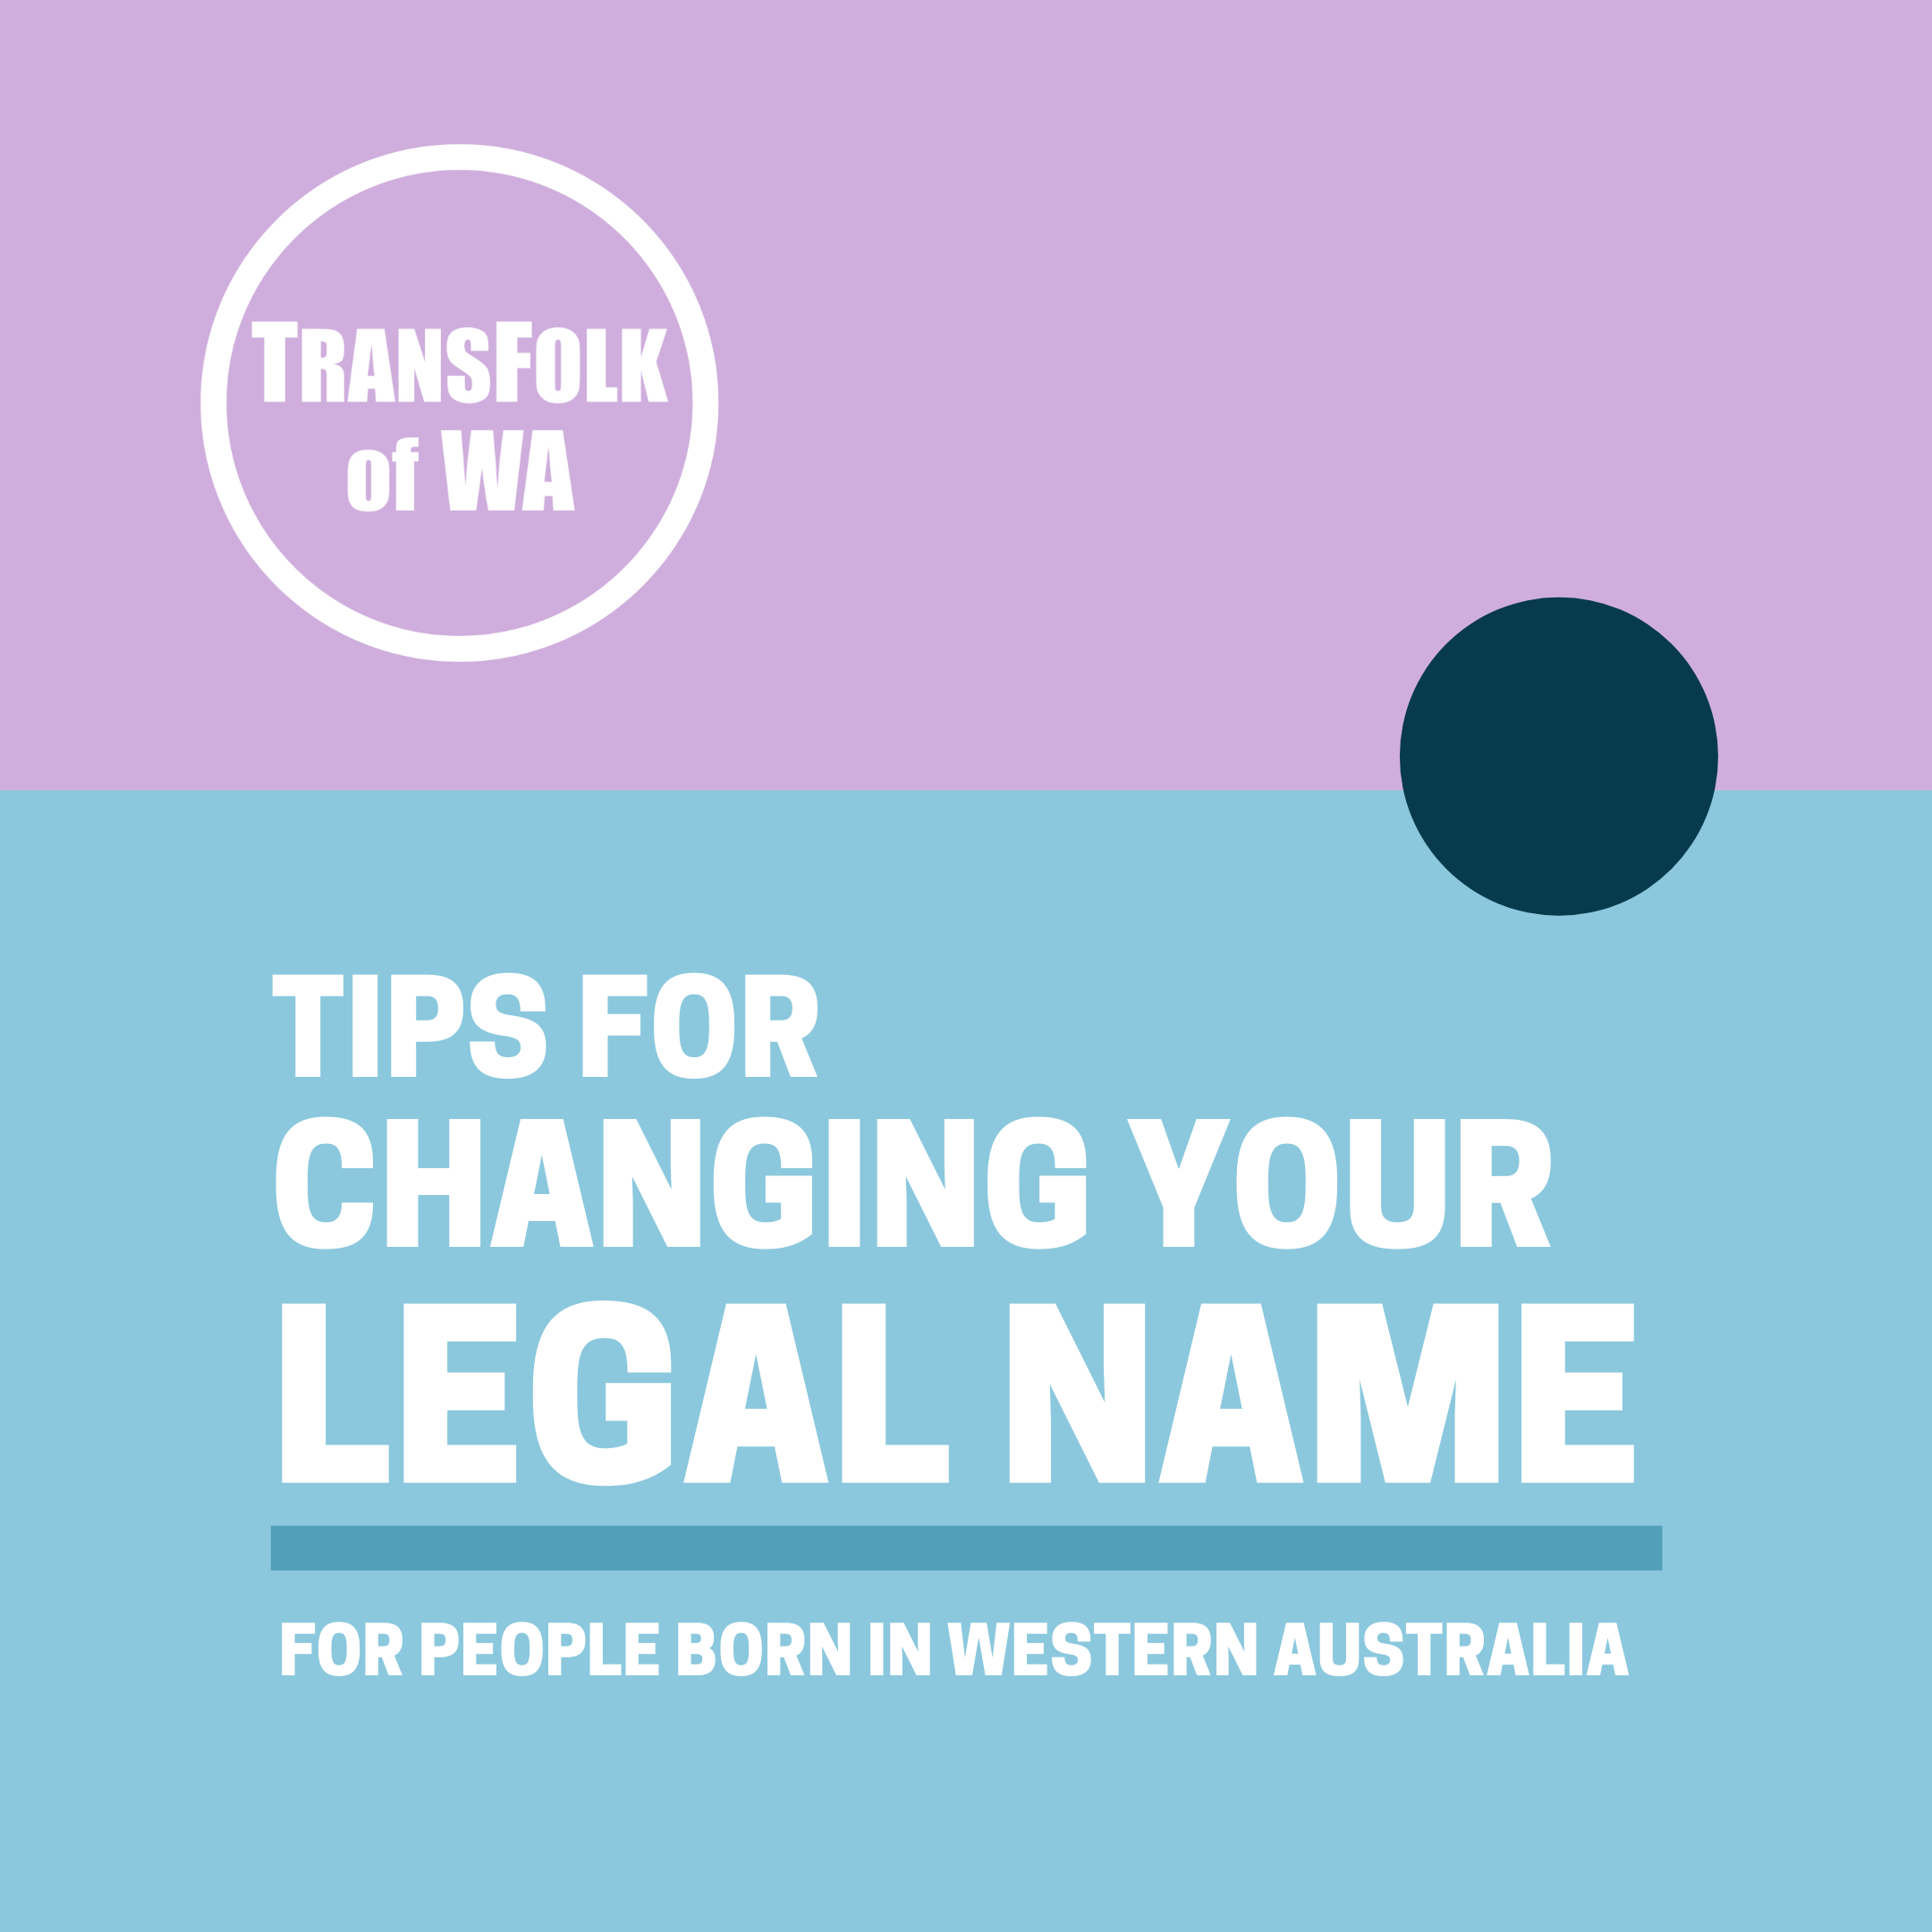 Guide to Changing Your legal Name – Instagram tiles